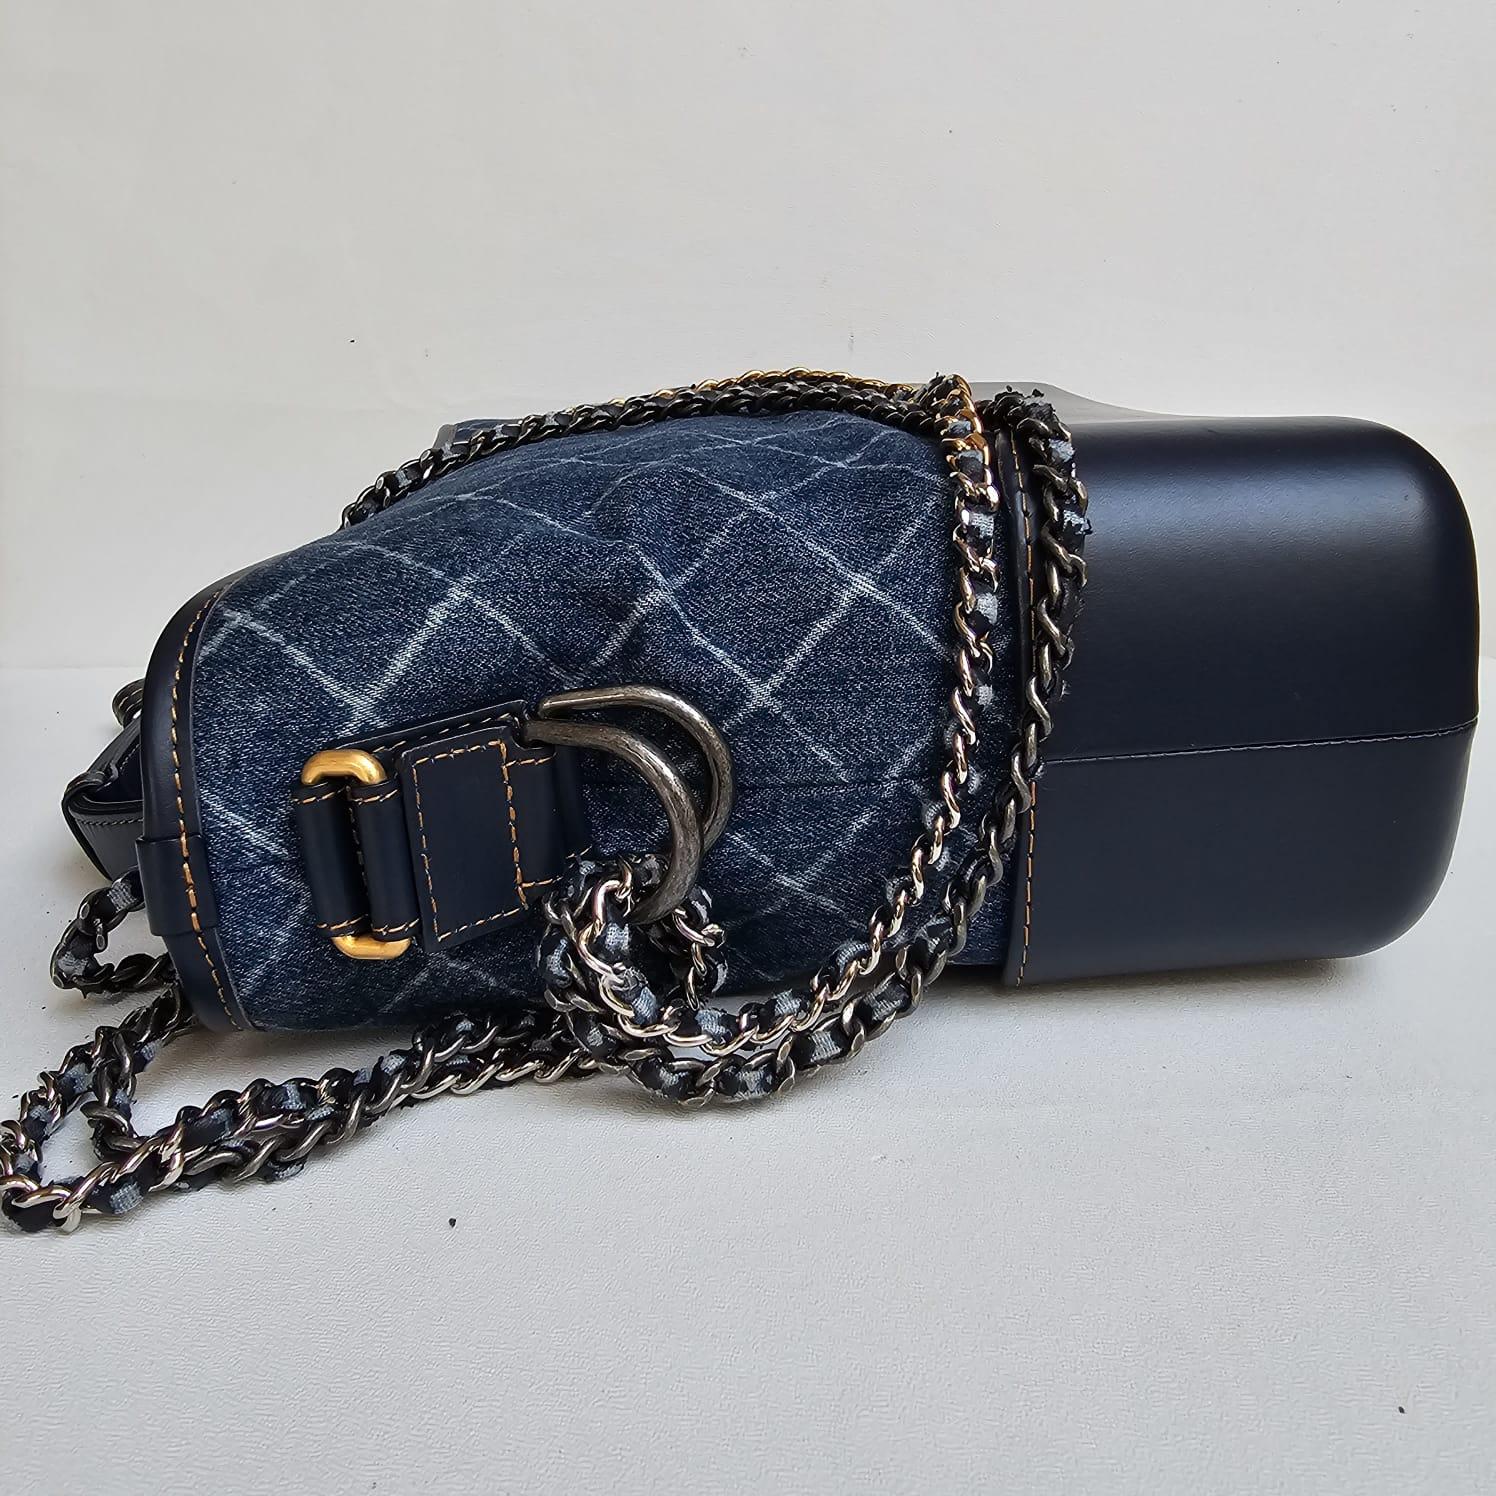 Chanel Medium Denim Quilted Gabrielle Hobo Bag For Sale 6